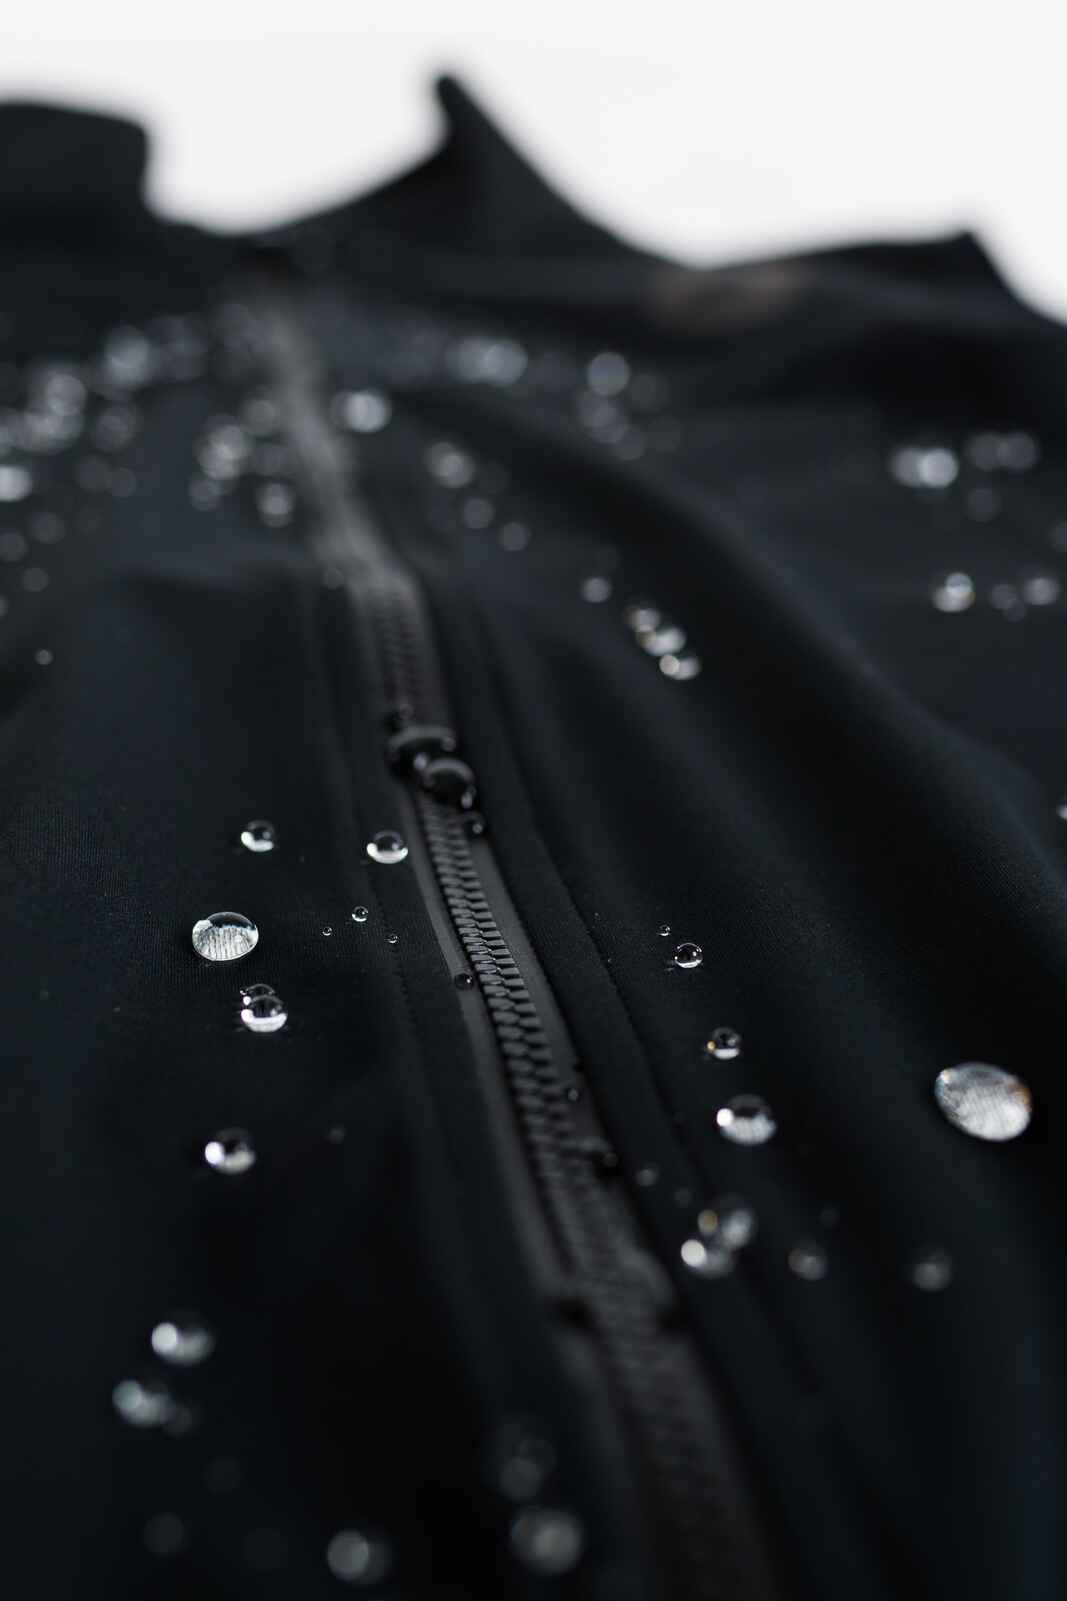  Mens Cycling Jacket for Cold Wet Weather - Water Resistant